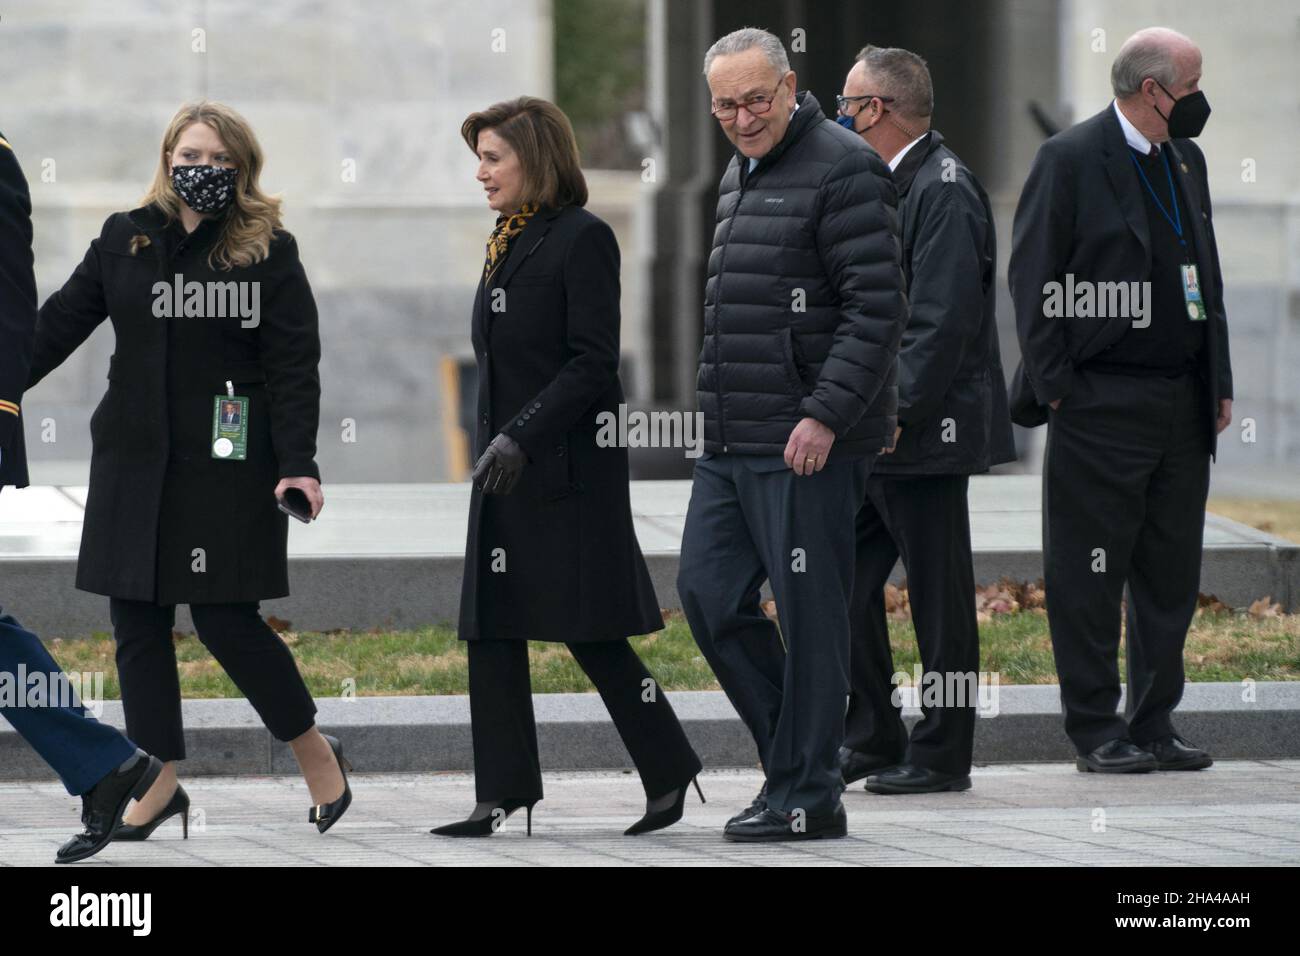 Washington DC, USA. 10th Dec 2021. Speaker Nancy Pelosi (D-Calif.) and Majority Leader Charles Schumer (D-N.Y.) are seen before a military honor guard carries the casket of Sen. Bob Dole (R-Kan.) after lying in state at the U.S. Capitol in Washington, DC, on Friday, December 10, 2021. Dole will be taken to Washington National Cathedral for a funeral service. Photo by Greg Nash/Pool/ABACAPRESS.COM Credit: Abaca Press/Alamy Live News Stock Photo